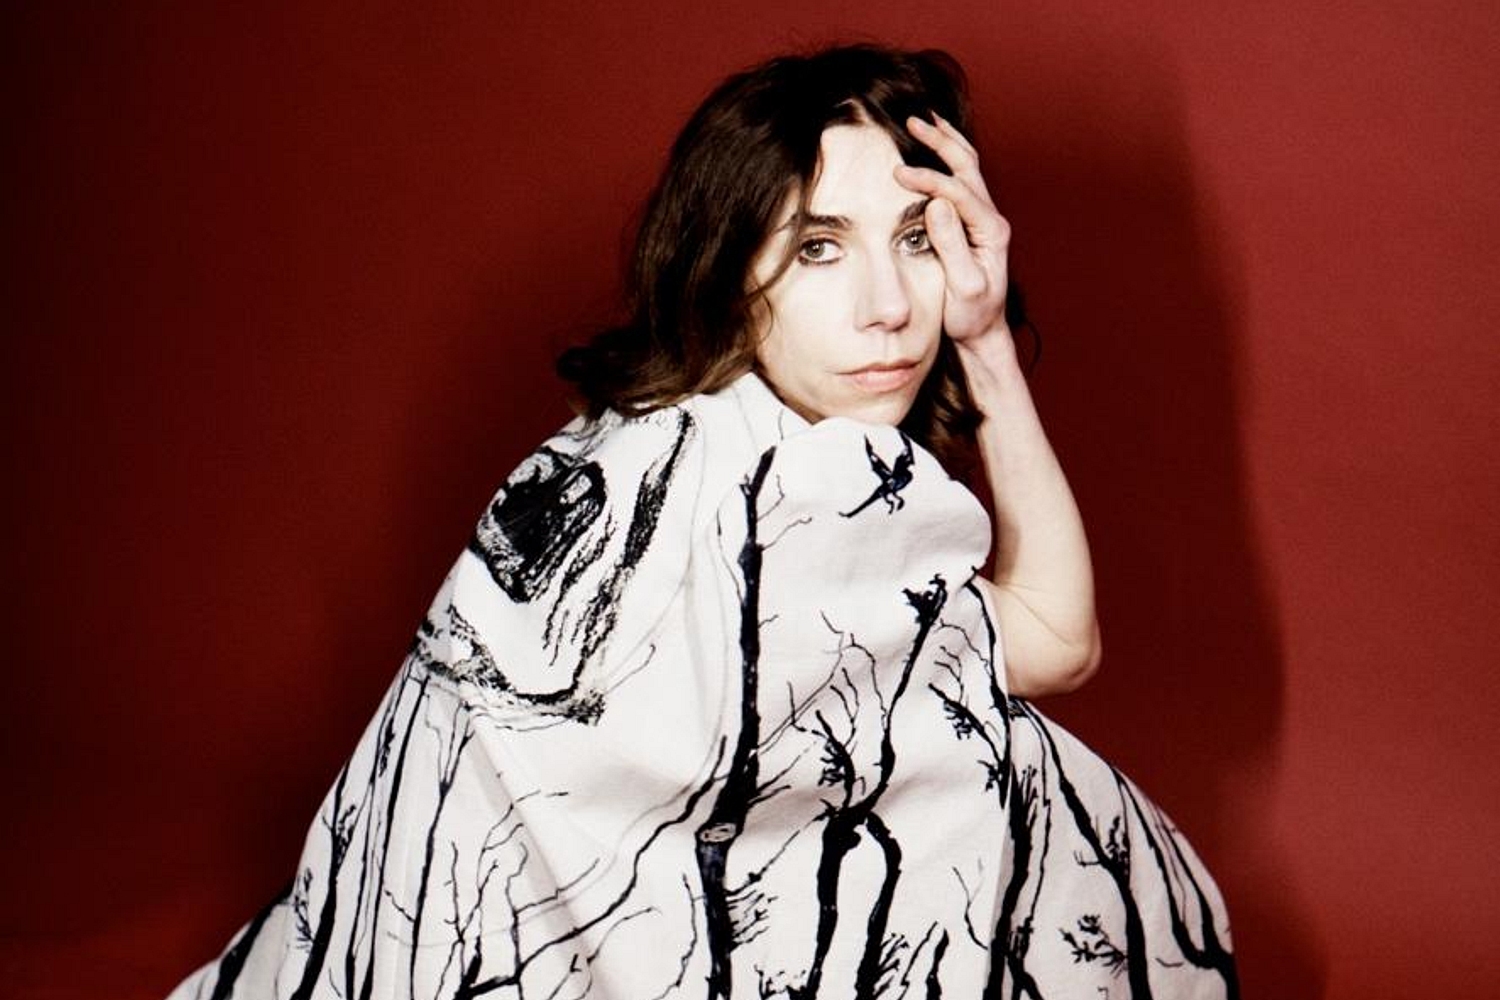 PJ Harvey releases new single ‘Seem An I’ and announces North American tour